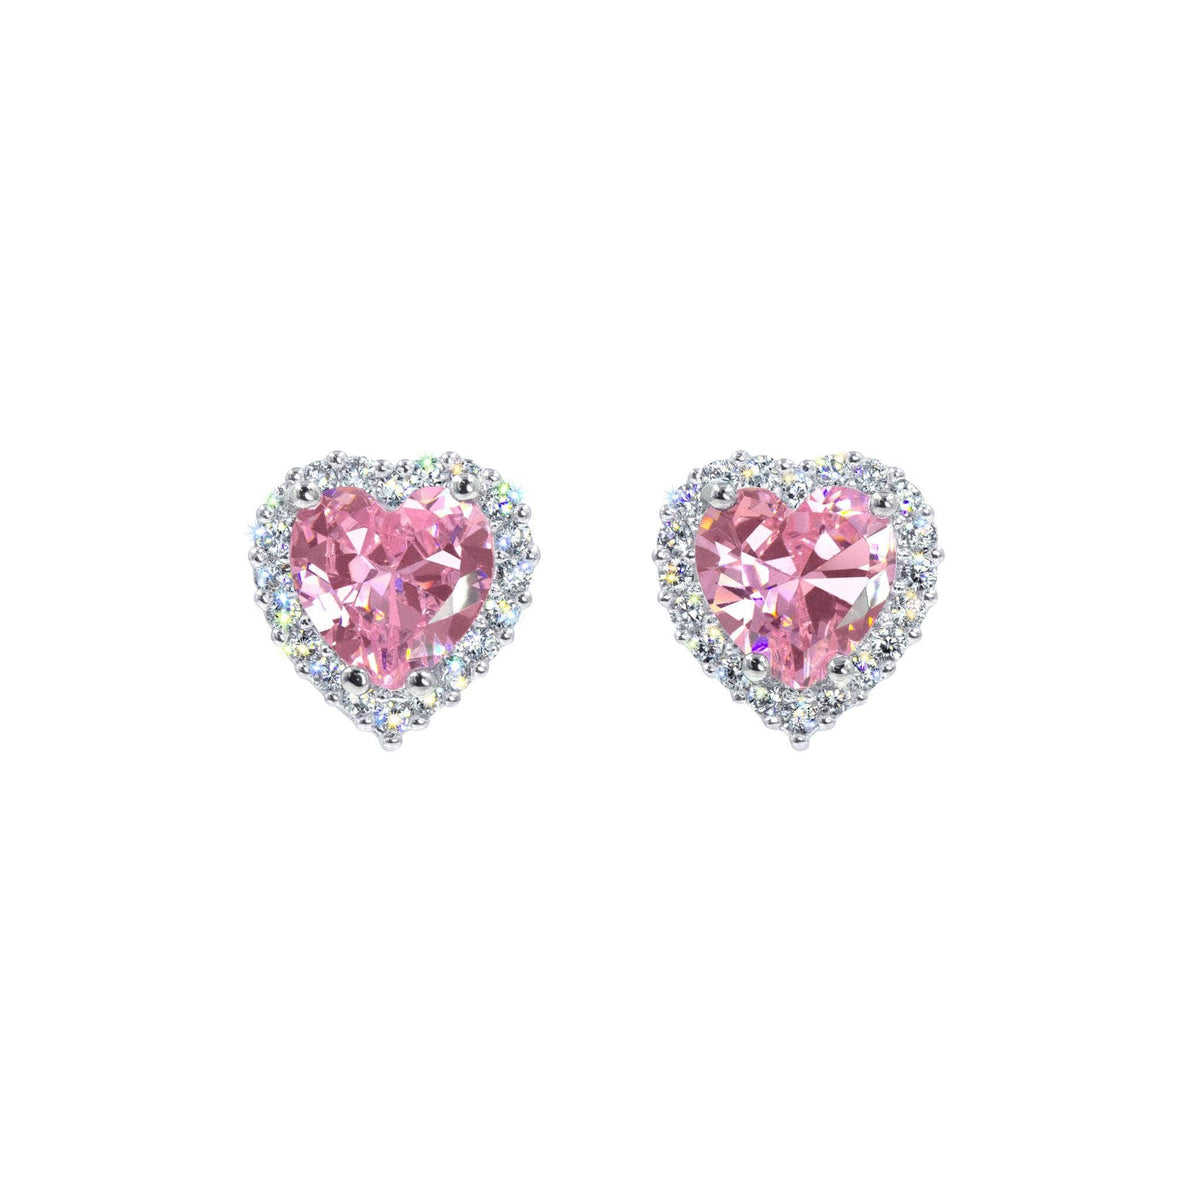 #17447 -Captivating Hearts Halo-Set CZ Button Earrings